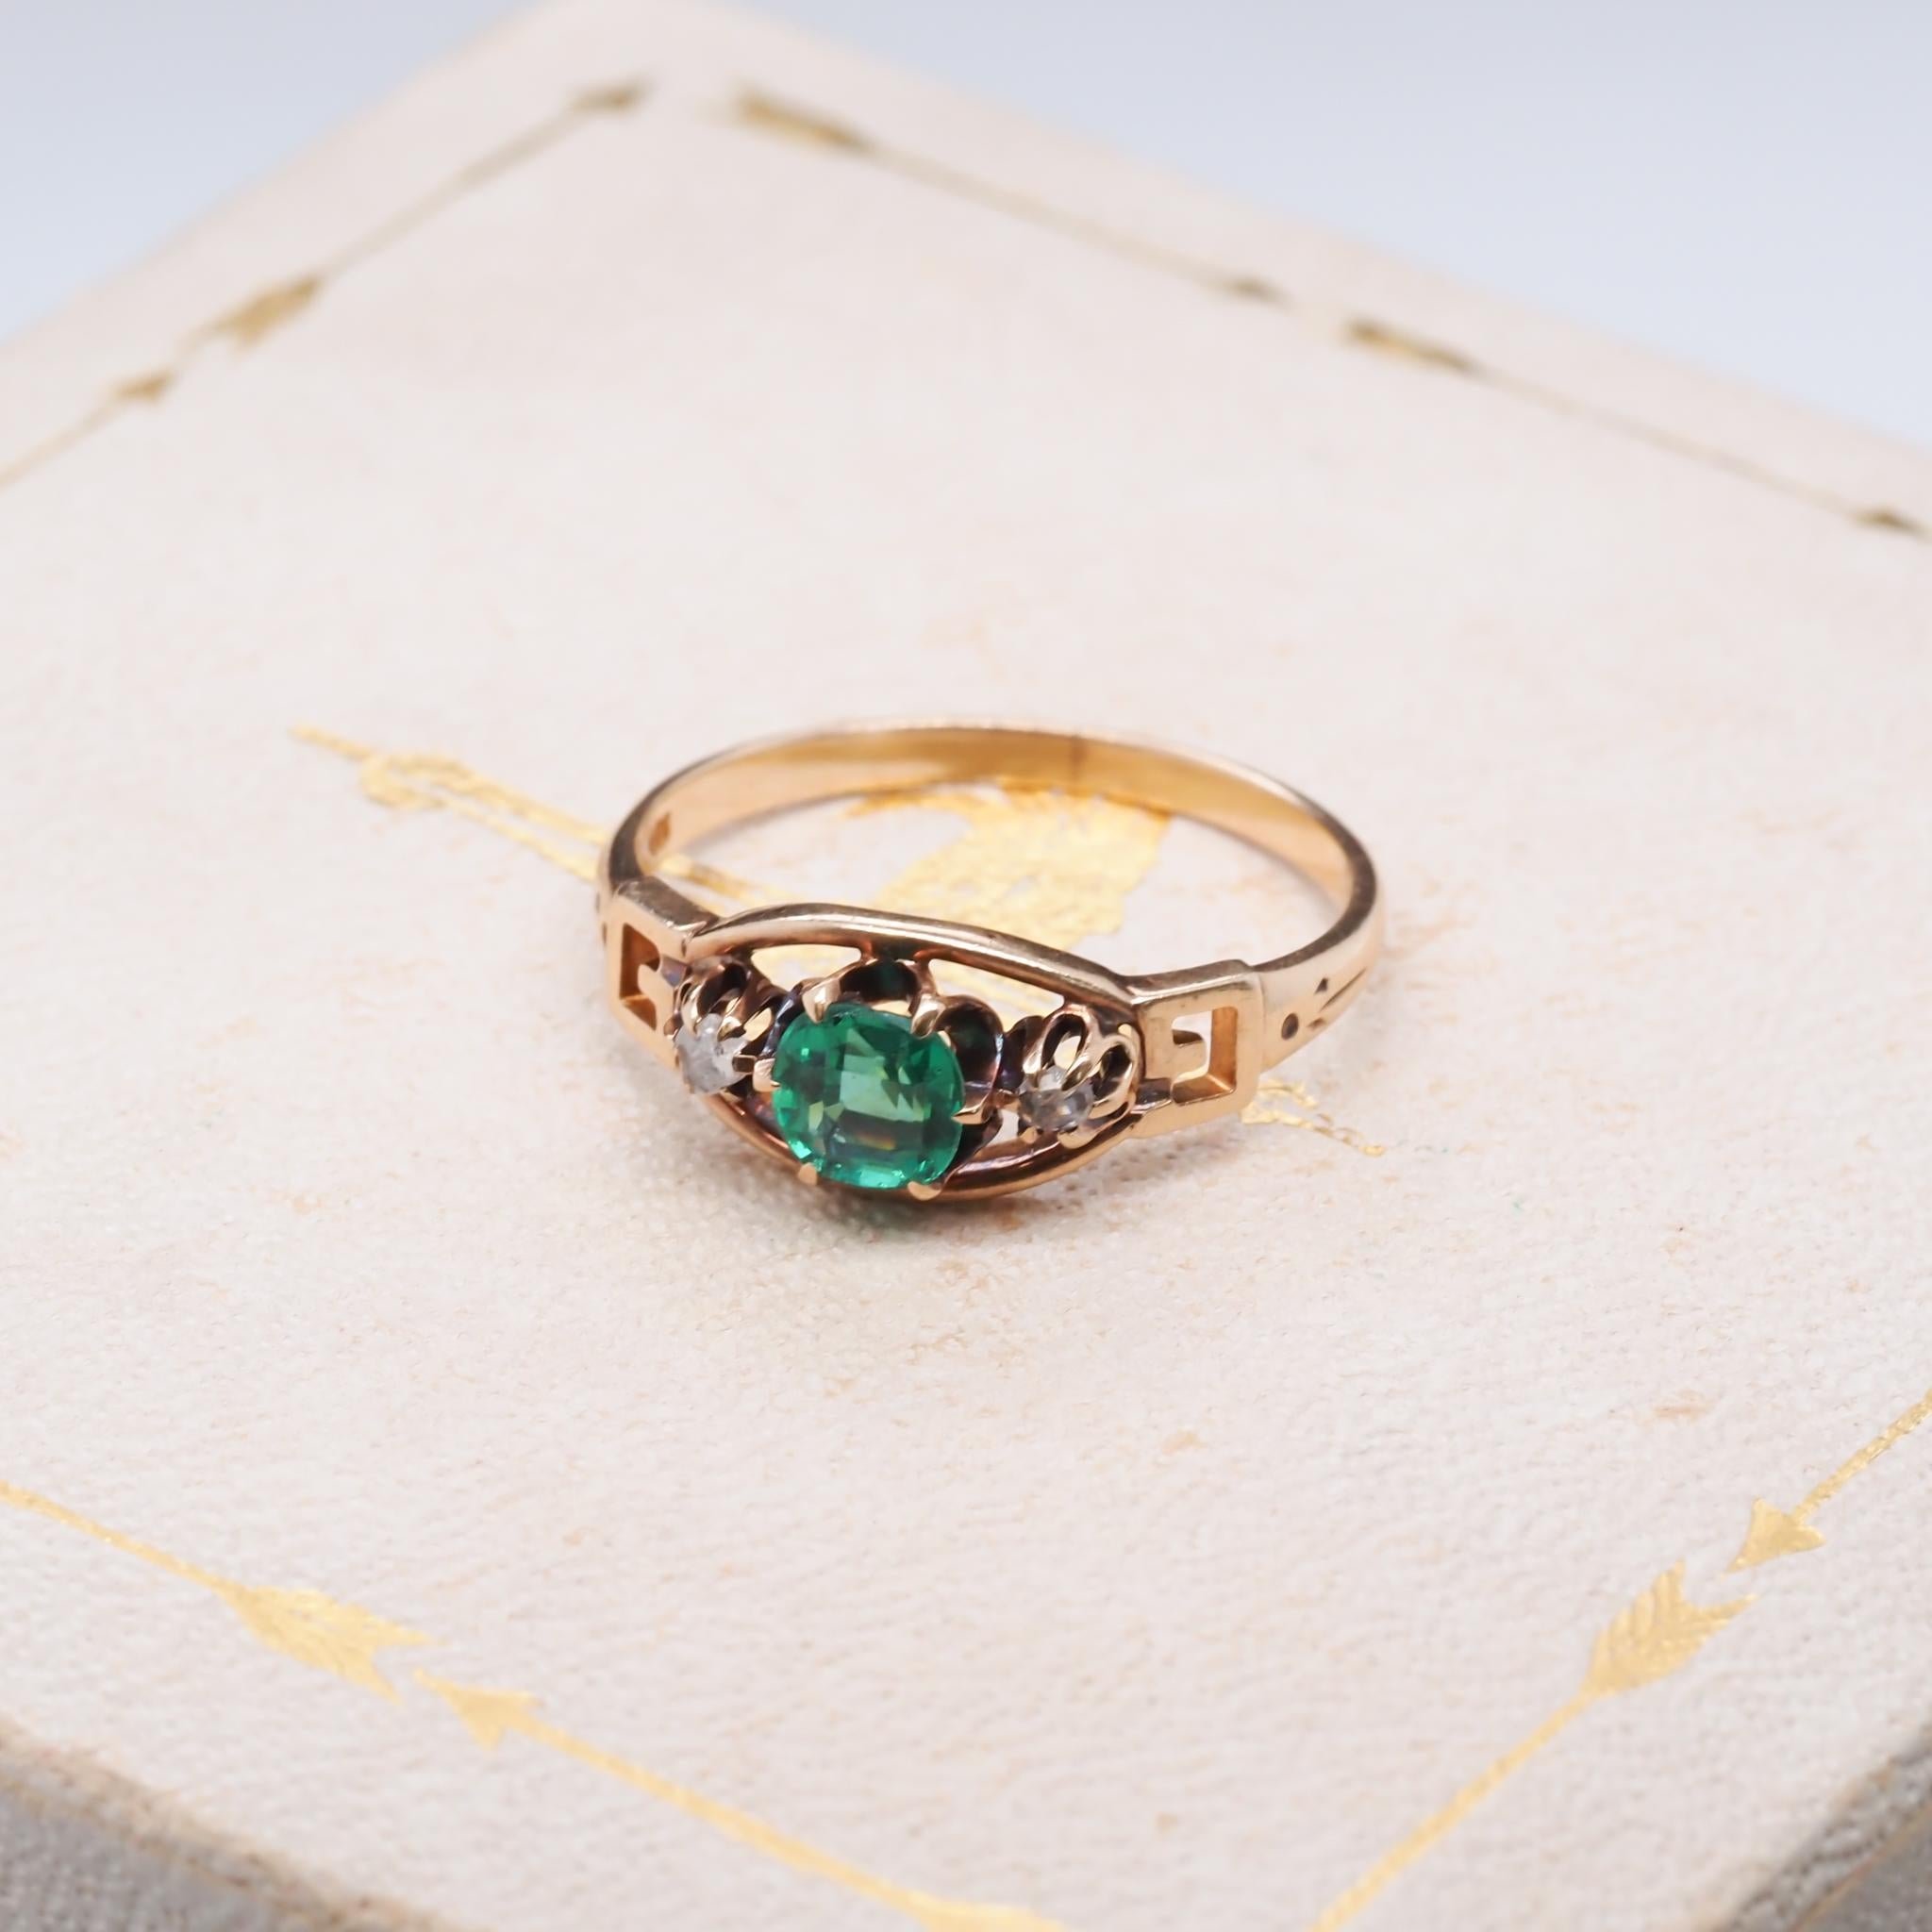 Circa 1900s Edwardian Emerald and Rose Cut Diamond Engagement Ring For Sale 1